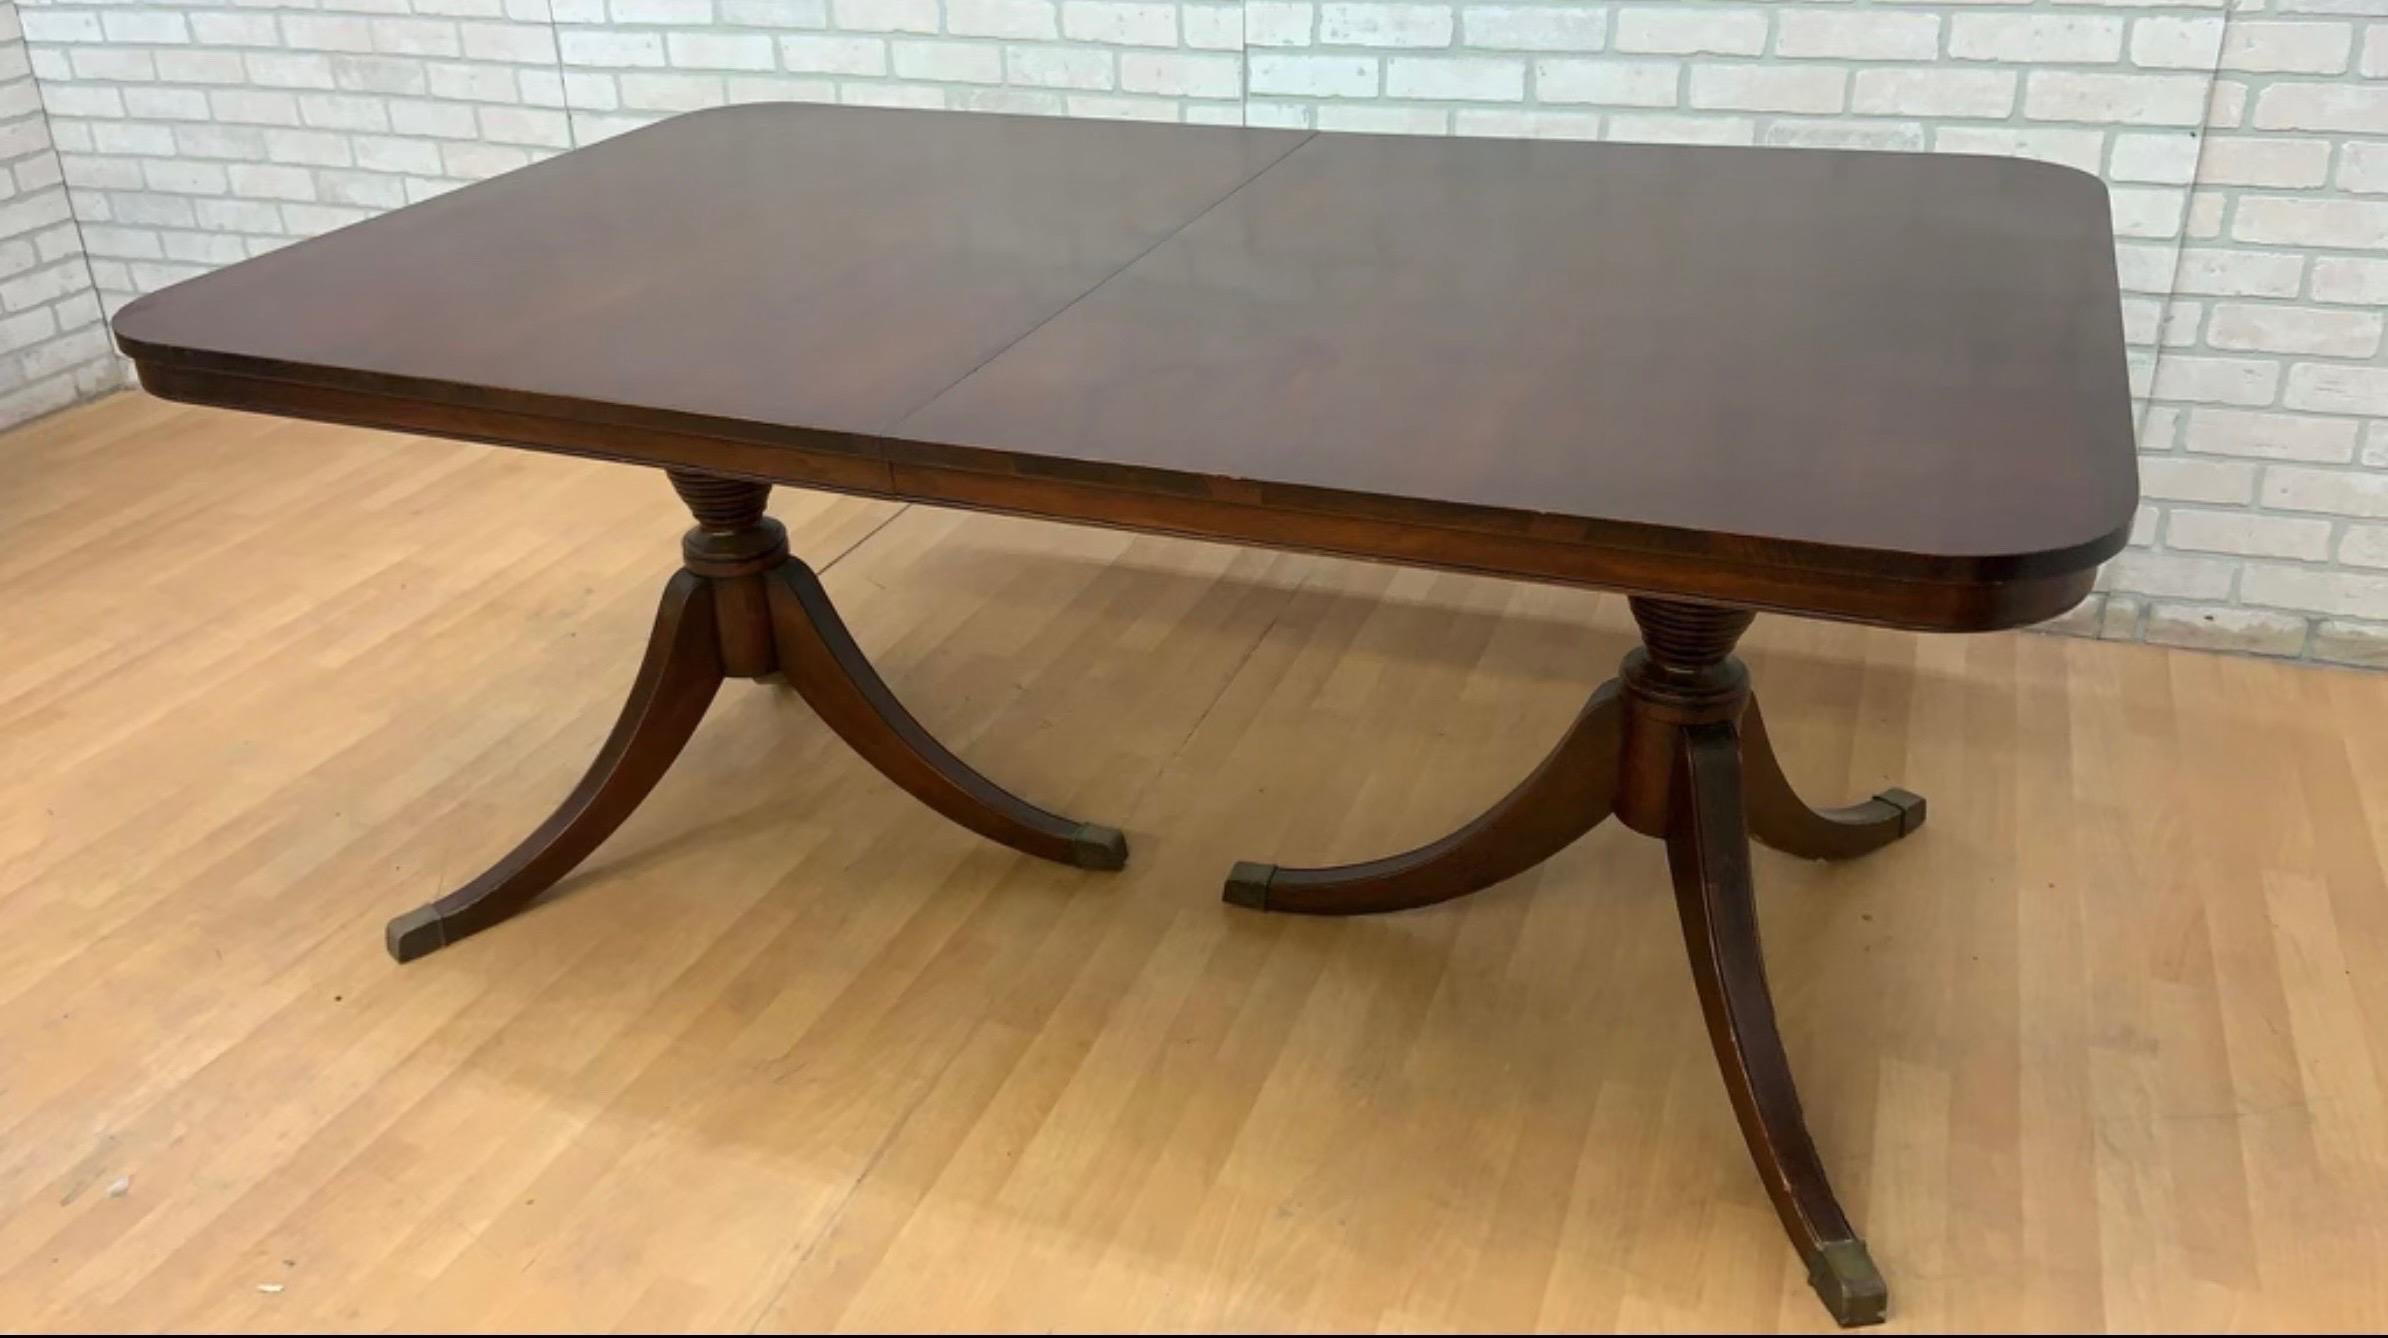 Antique Regency Duncan Phyfe Style Mahogany Dining Table w/ 3 Leaves For Sale 1